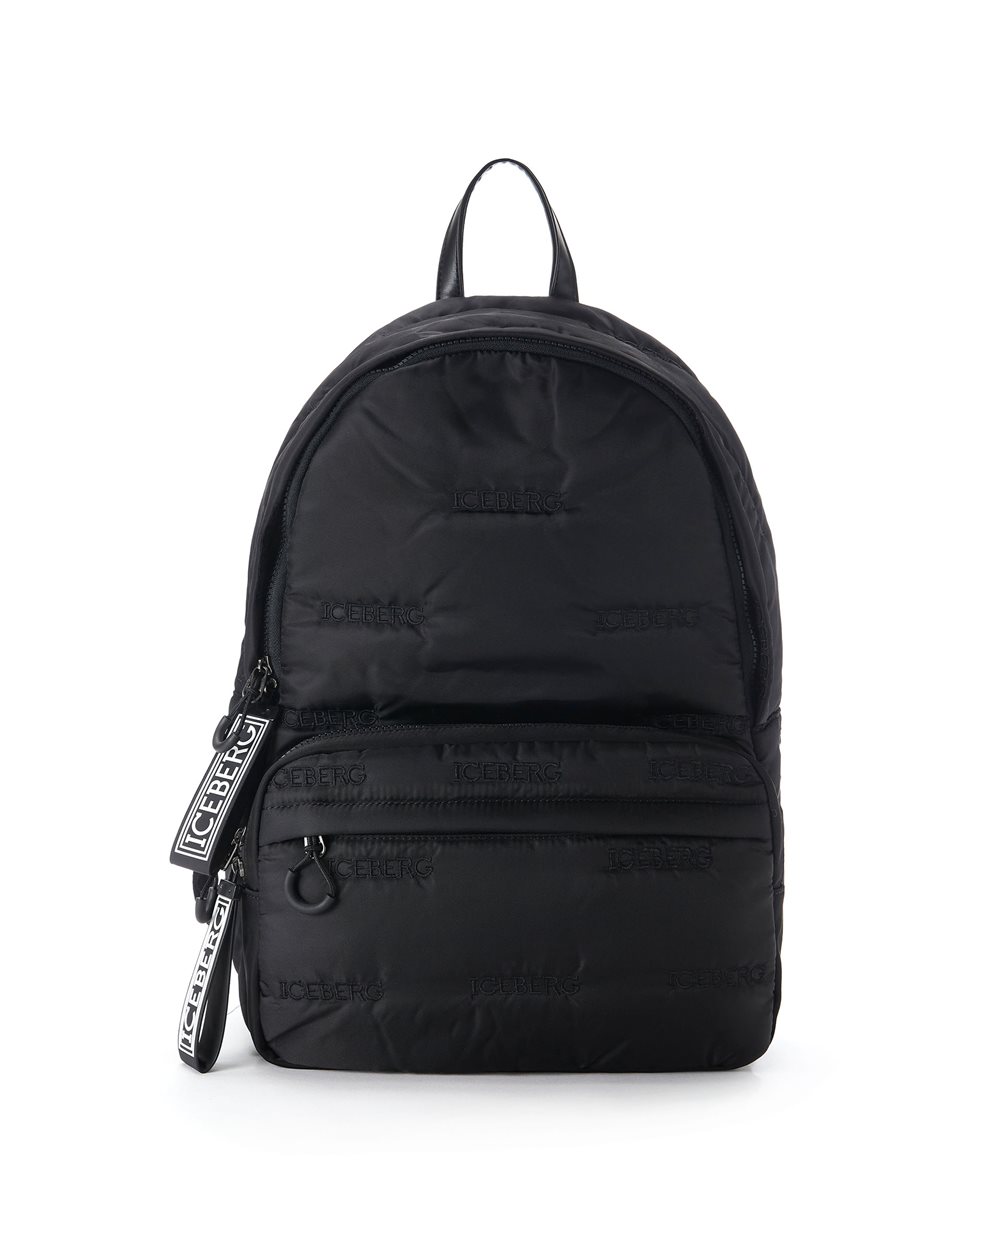 Nylon backpack with allover logo -  ( SECONDO STEP US )  PROMO UP TO 50%  | Iceberg - Official Website